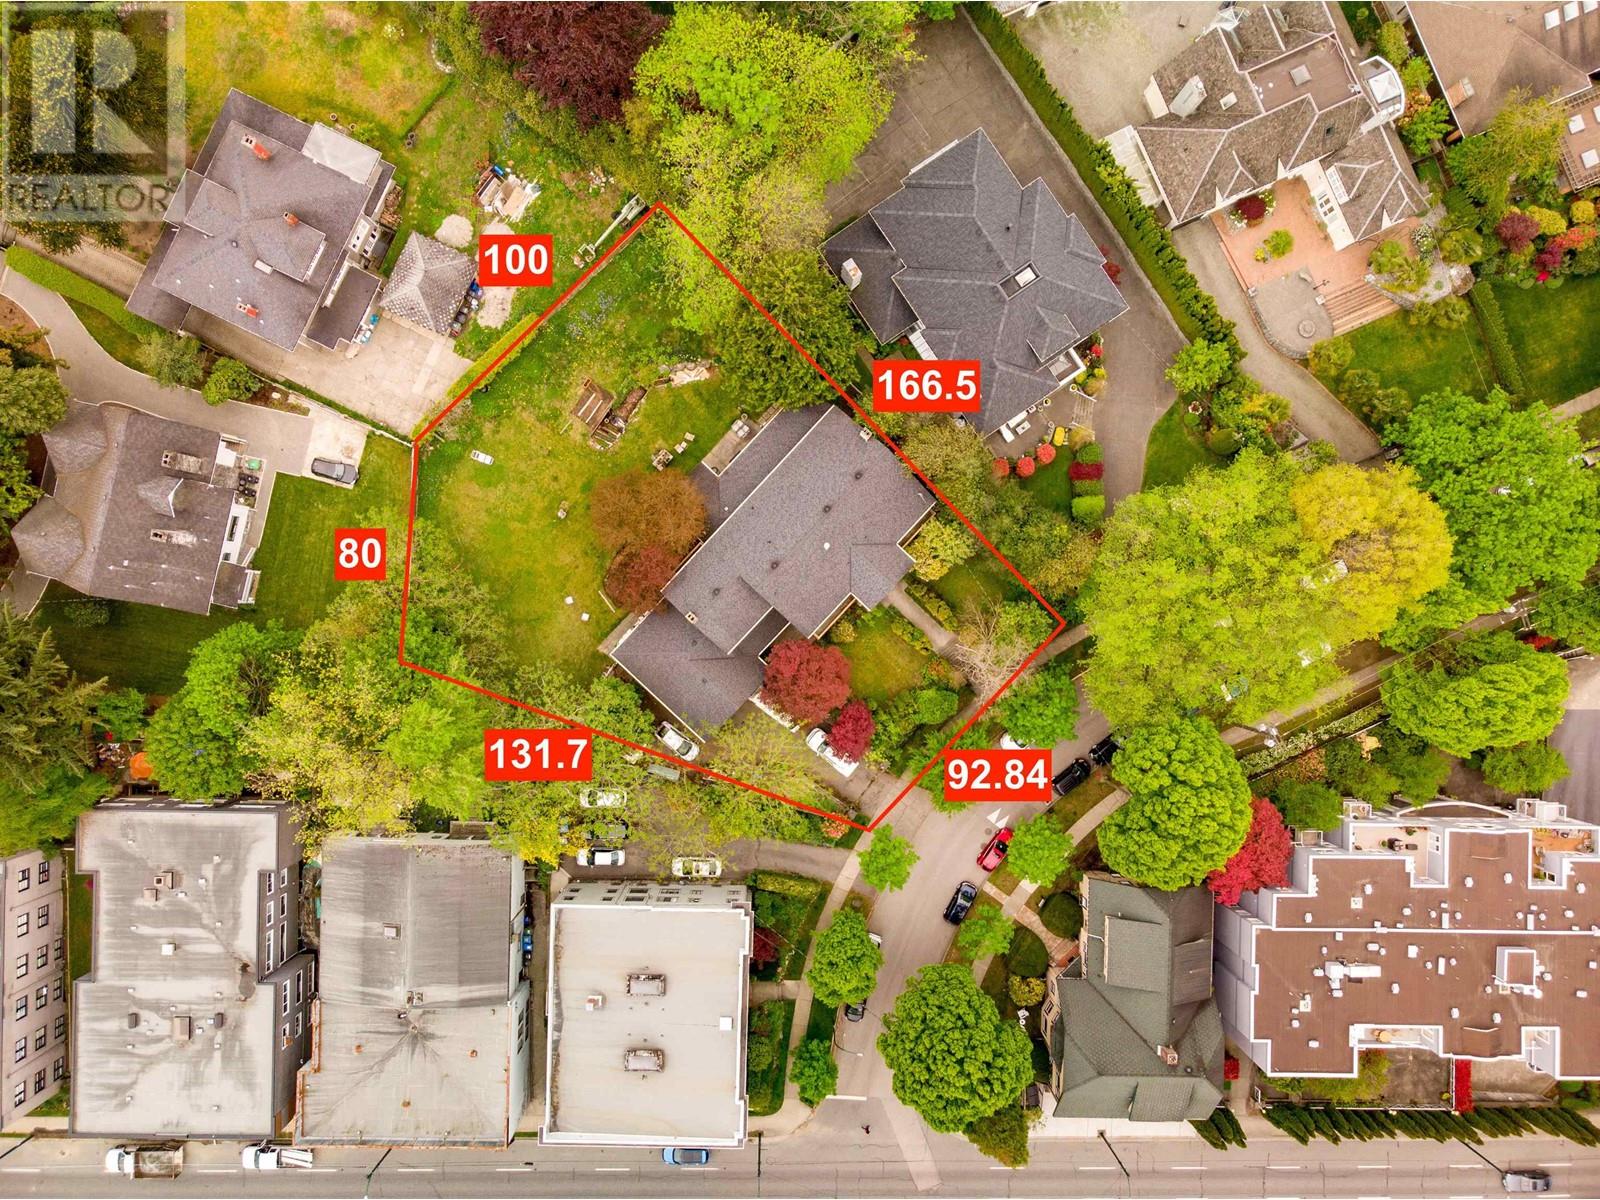 Listing Picture 3 of 3 : 1020 WOLFE AVENUE, Vancouver / 溫哥華 - 魯藝地產 Yvonne Lu Group - MLS Medallion Club Member